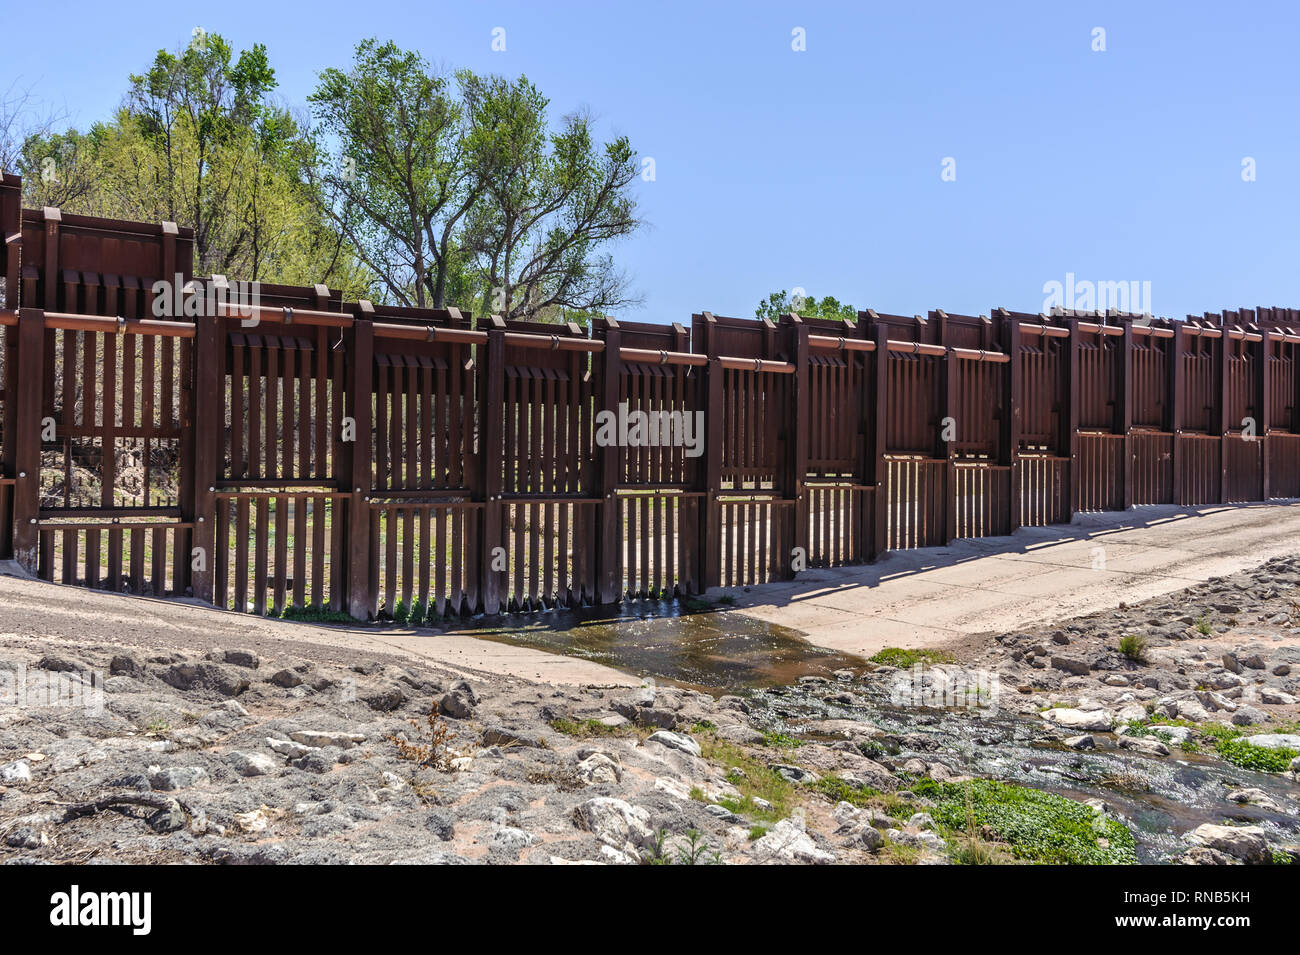 US border fence on Mexico boundary, bollard type pedestrian barrier, special design to allow water flow, US side, east of Nogales Arizona, April 2018 Stock Photo